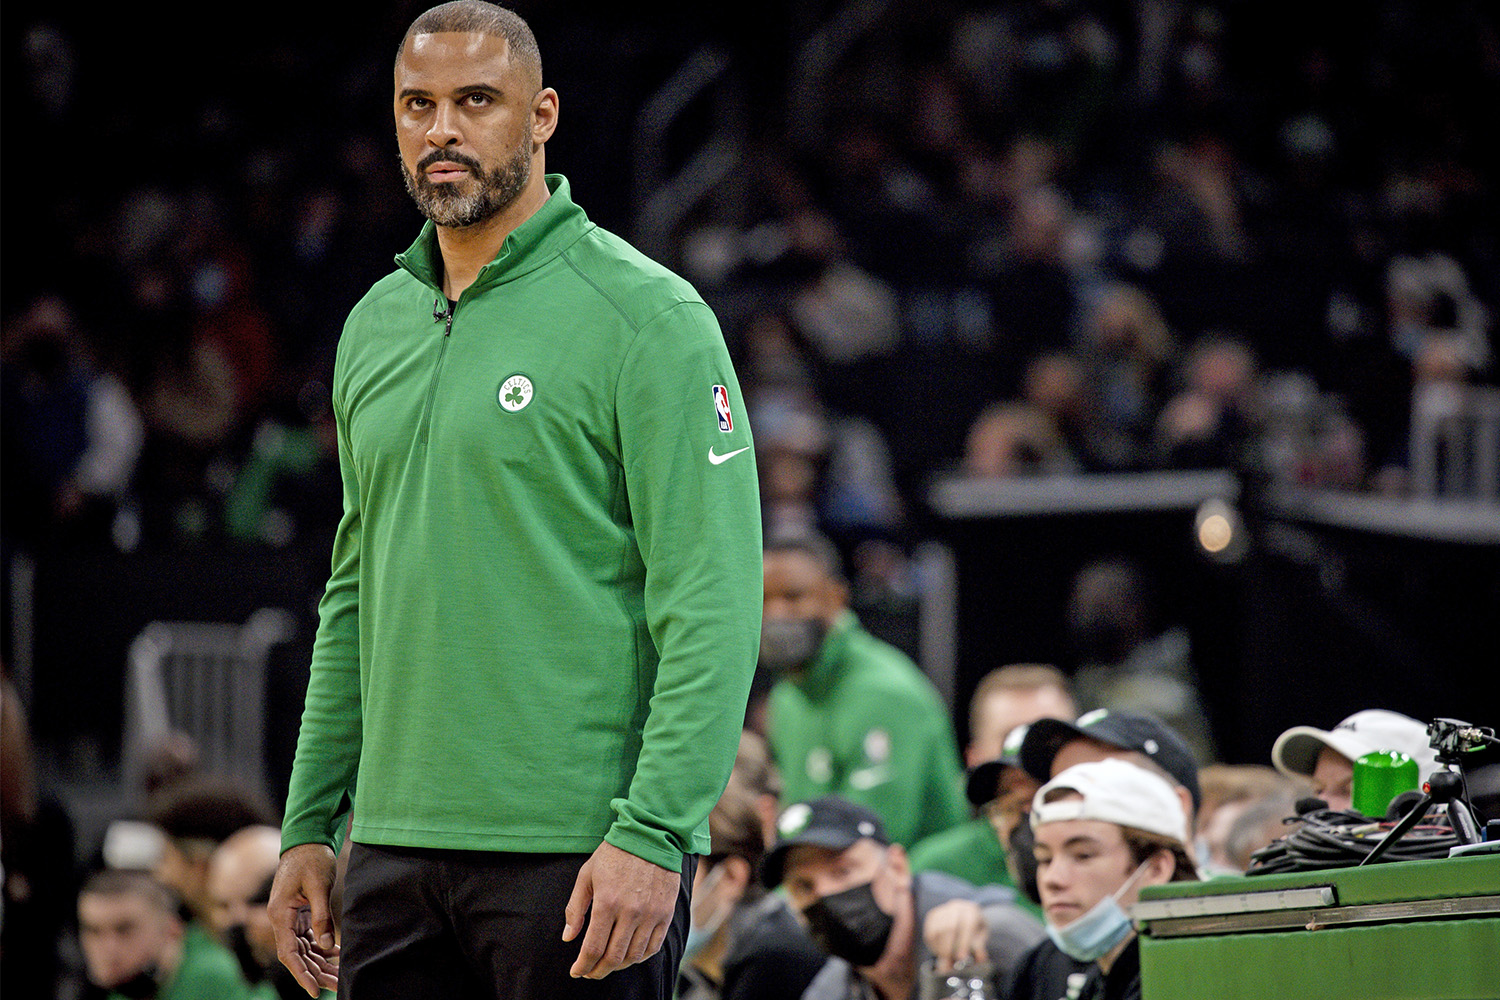 BOSTON, MASSACHUSETTS - DECEMBER 17: Head Coach Ime Udoka looks on during the second half against the Golden State Warriors at TD Garden on December 17, 2021 in Boston, Massachusetts. NOTE TO USER: User expressly acknowledges and agrees that, by downloading and or using this photograph, User is consenting to the terms and conditions of the Getty Images License Agreement. (Photo by Maddie Malhotra/Getty Images)